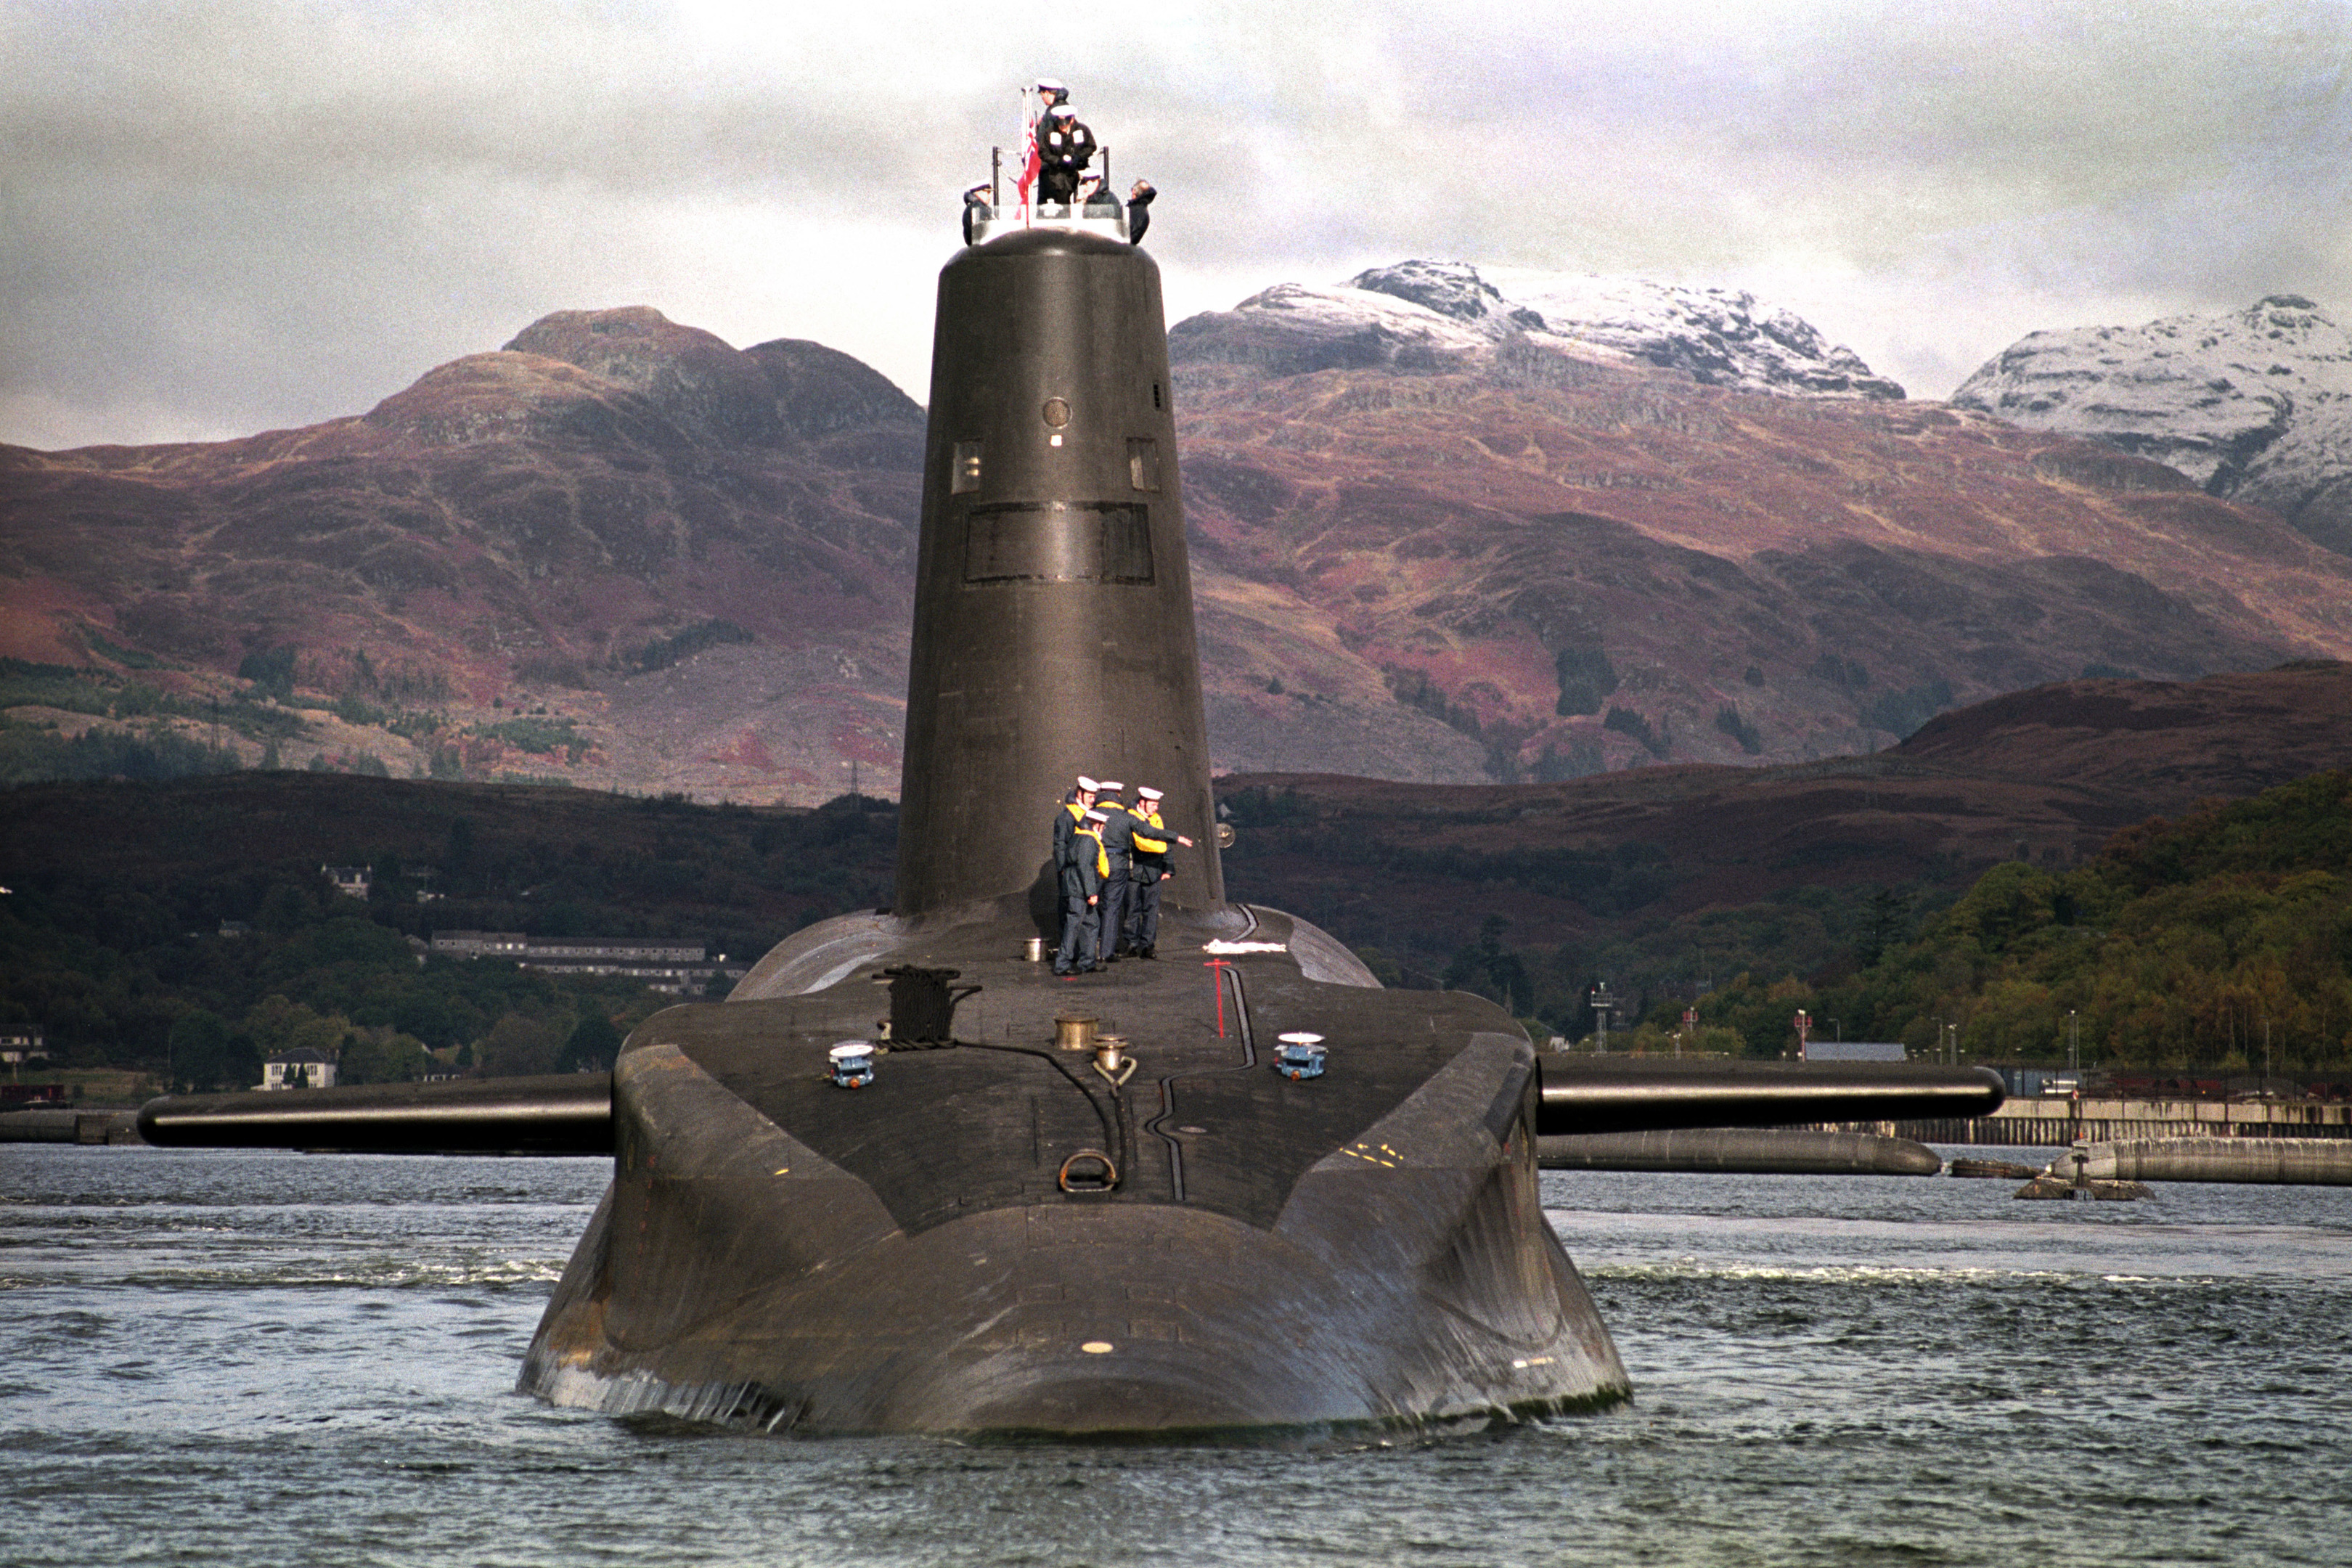 Four Trident-carrying Vanguard submarines are based at Faslane on the Clyde.